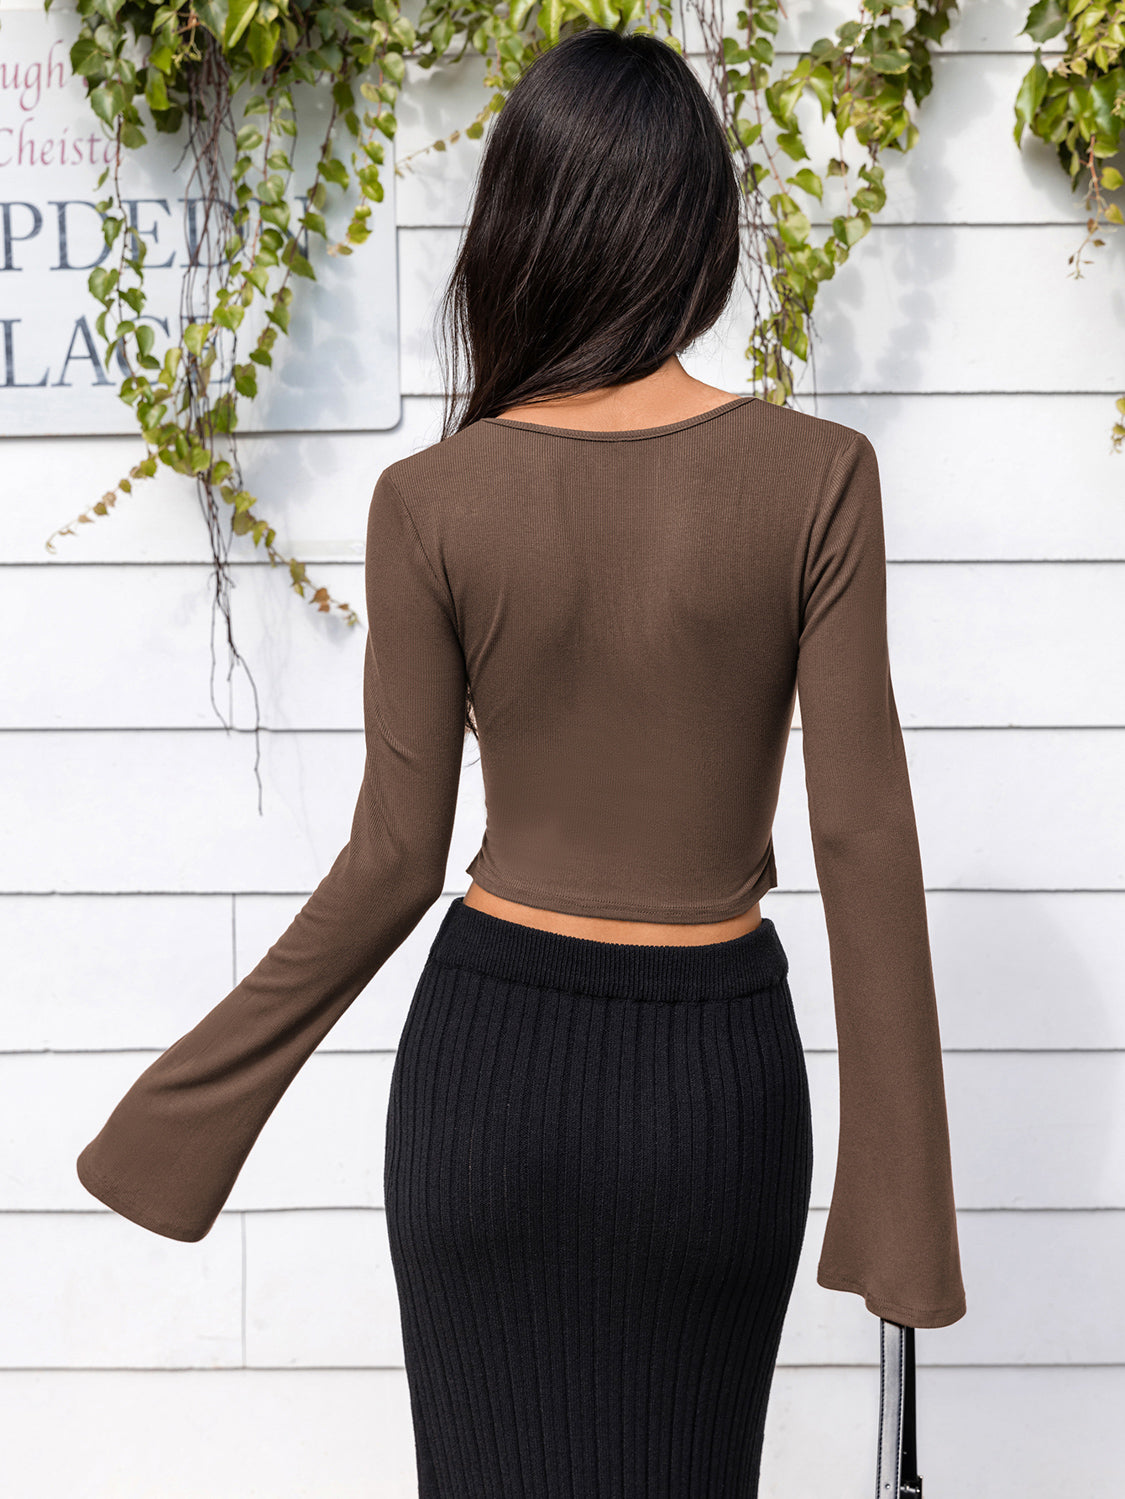 Lone Sleeve Cutout Zip Up Crop Top - Women’s Clothing & Accessories - Shirts & Tops - 4 - 2024